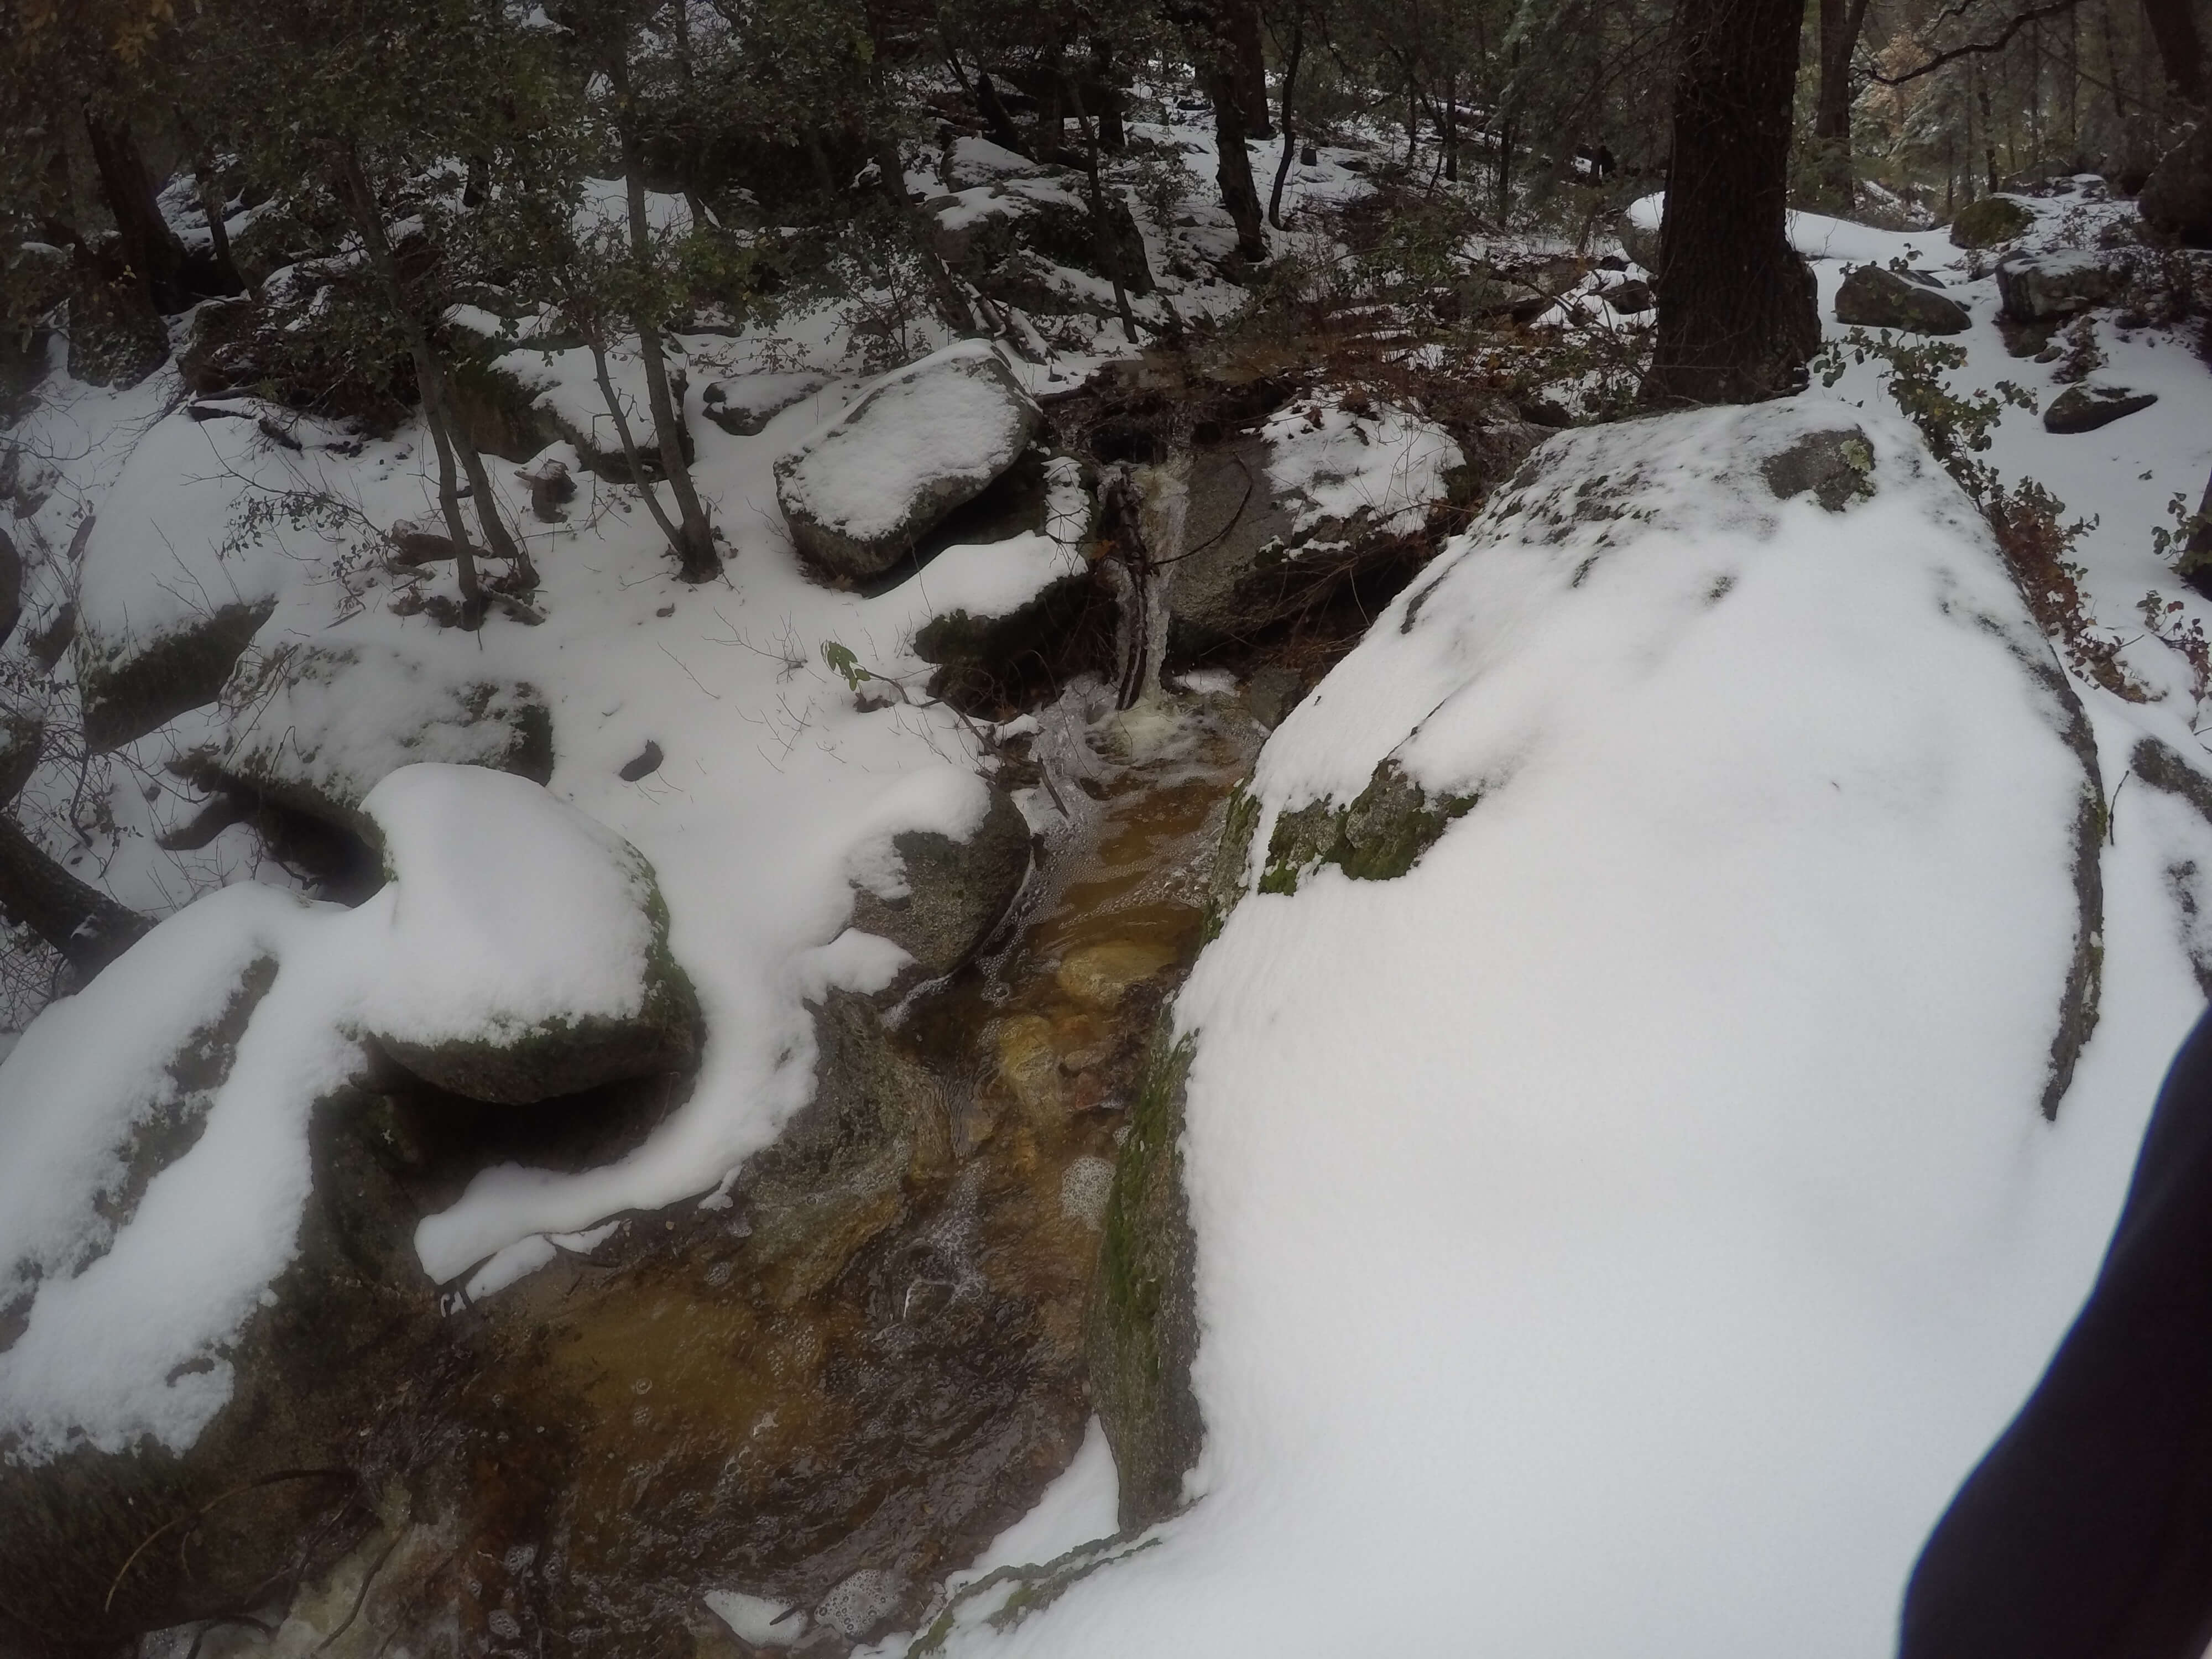 Stream crossing along the trail in the snow Palomar Mountain, CA